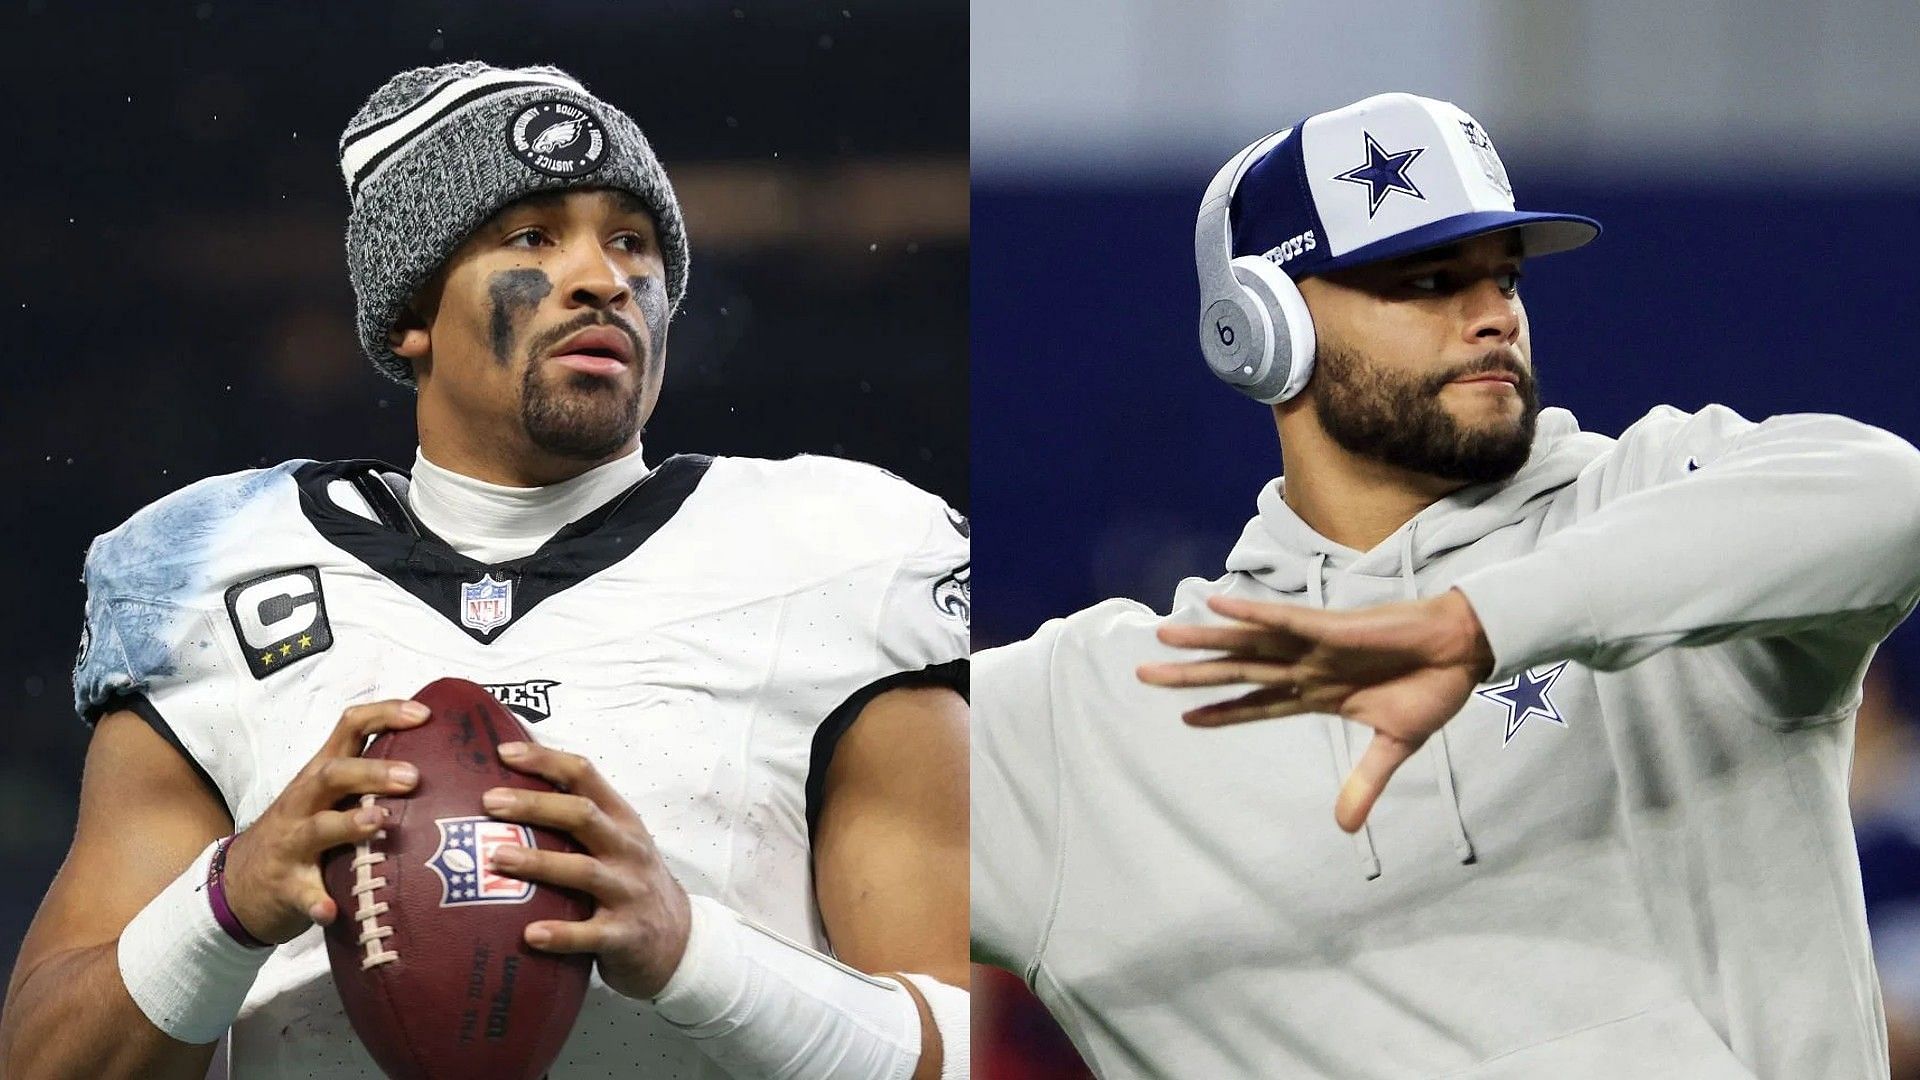 NFL analyst calls out double-standard between Jalen Hurts and Dak Prescott as Eagles QB slips into league-worst statistic